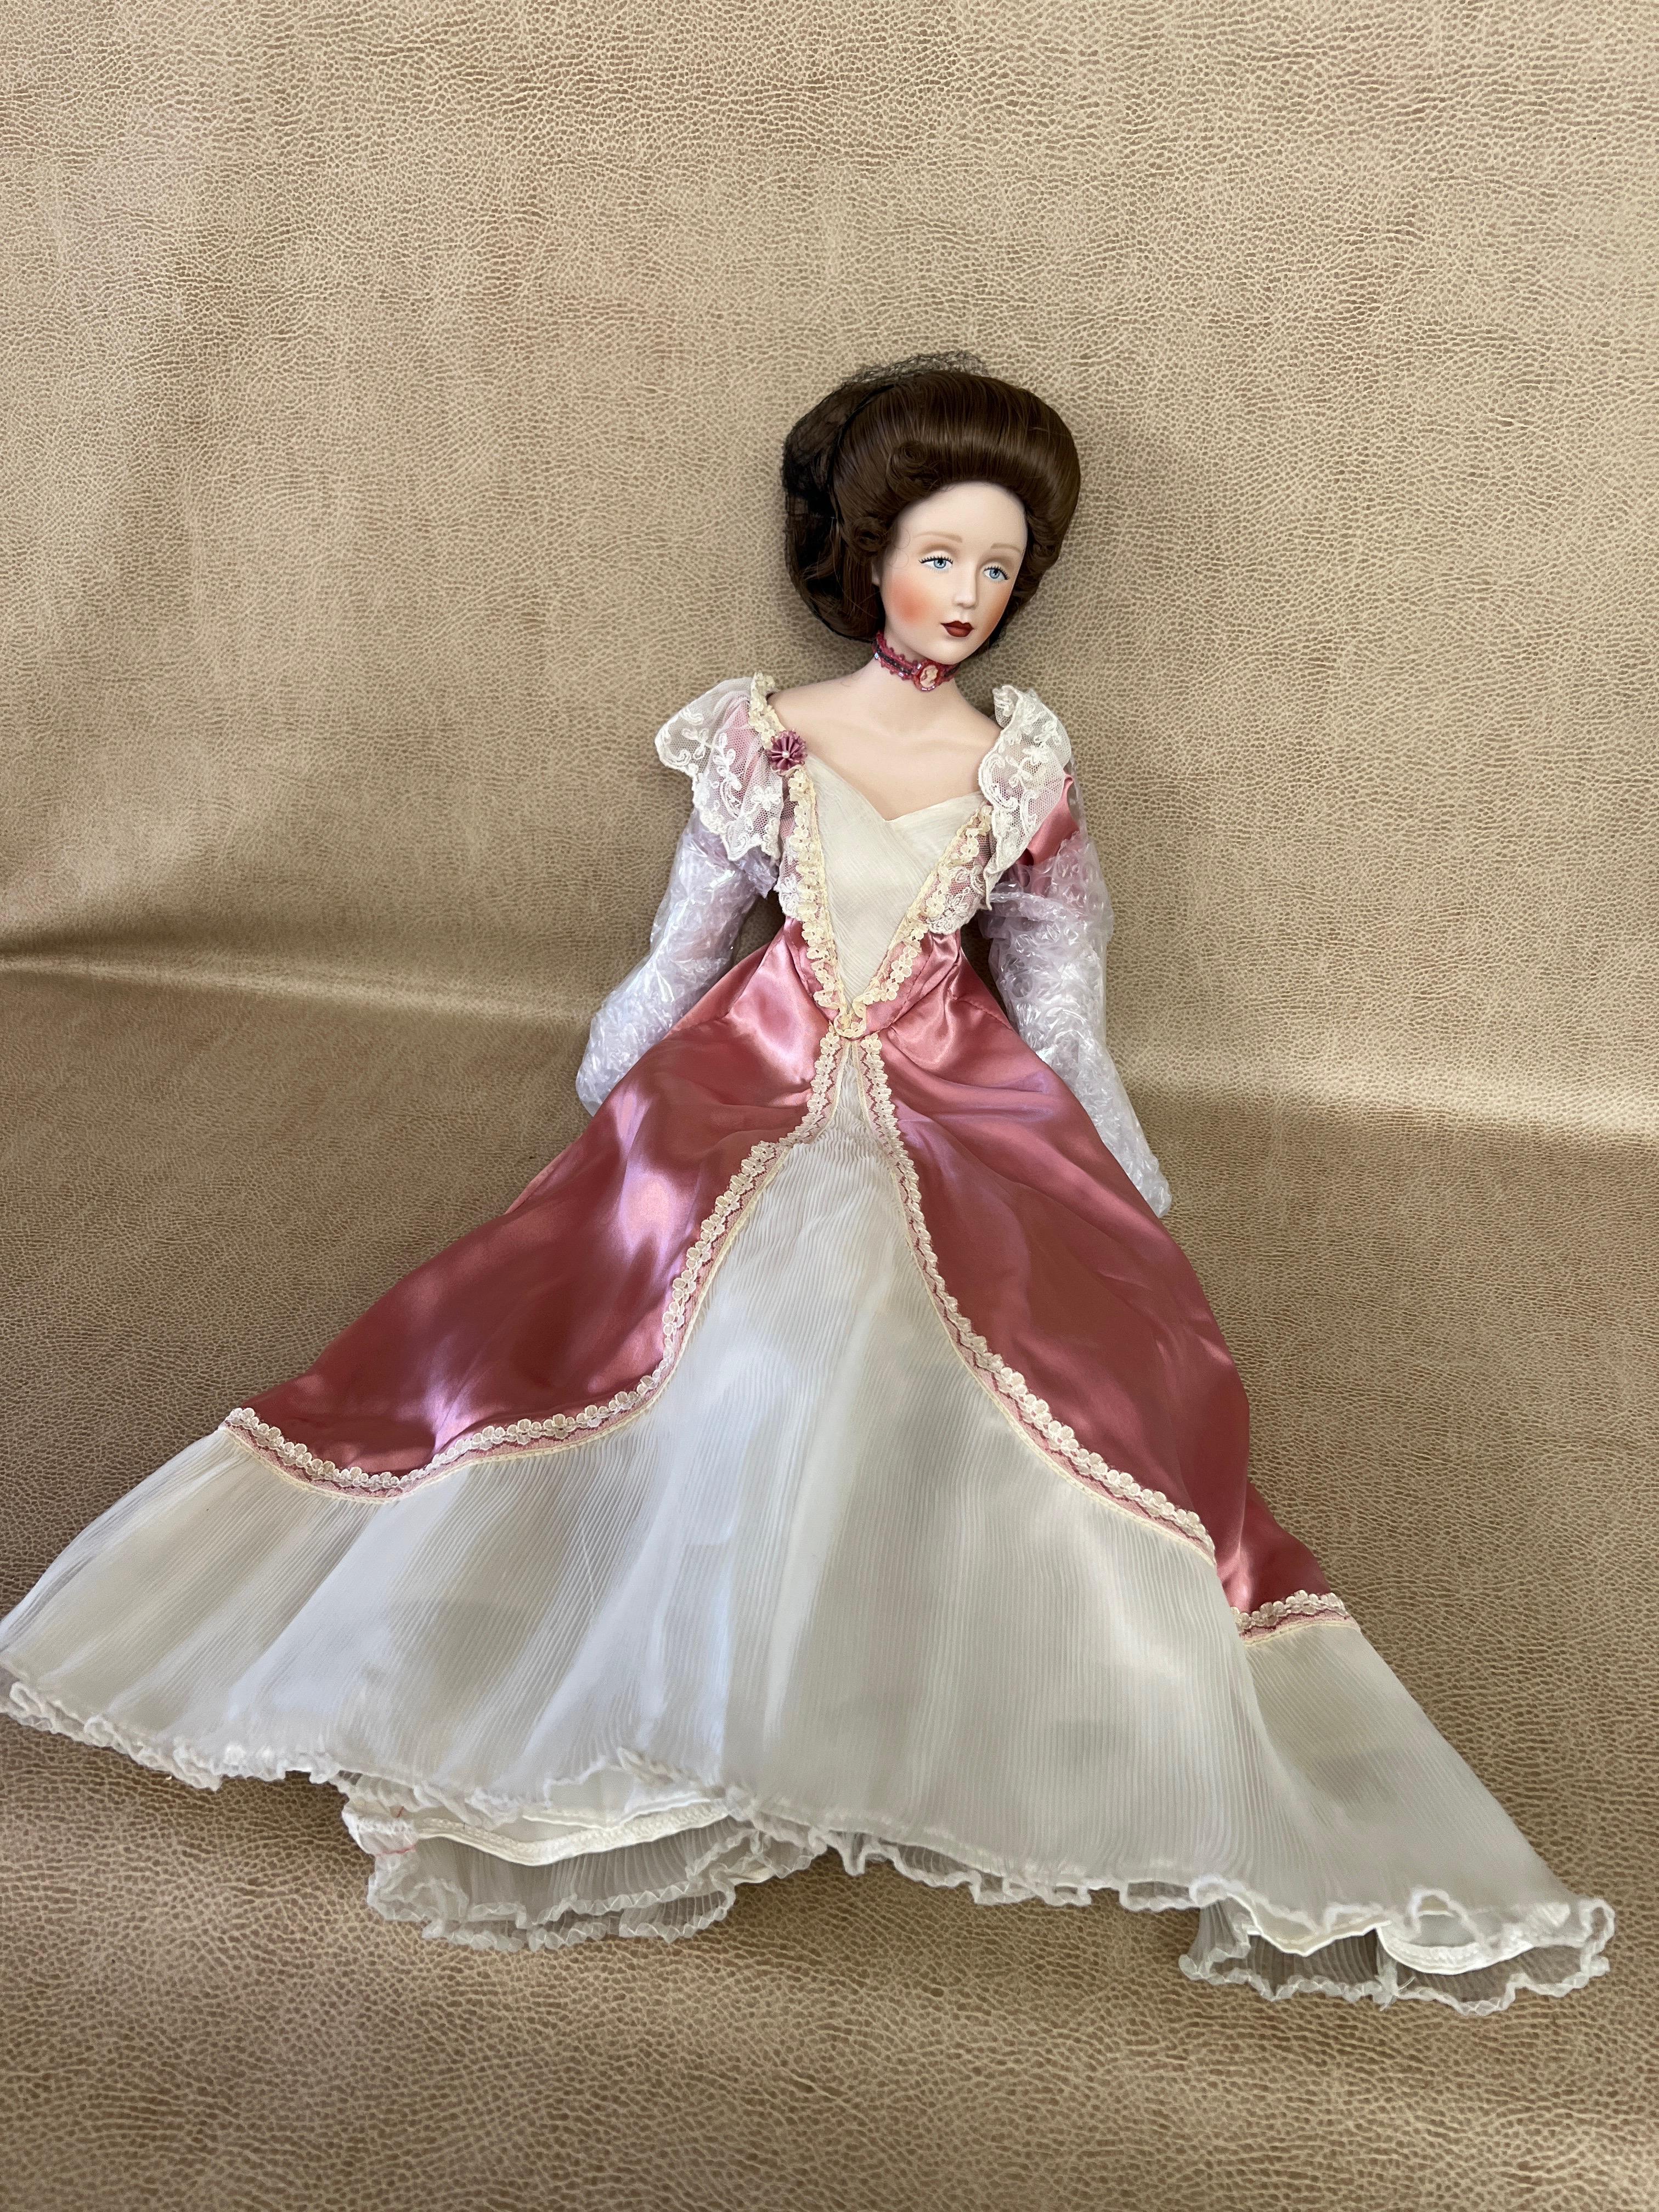 13PC FRANKLIN MINT HEIRLOOM COLLECTOR DOLLS